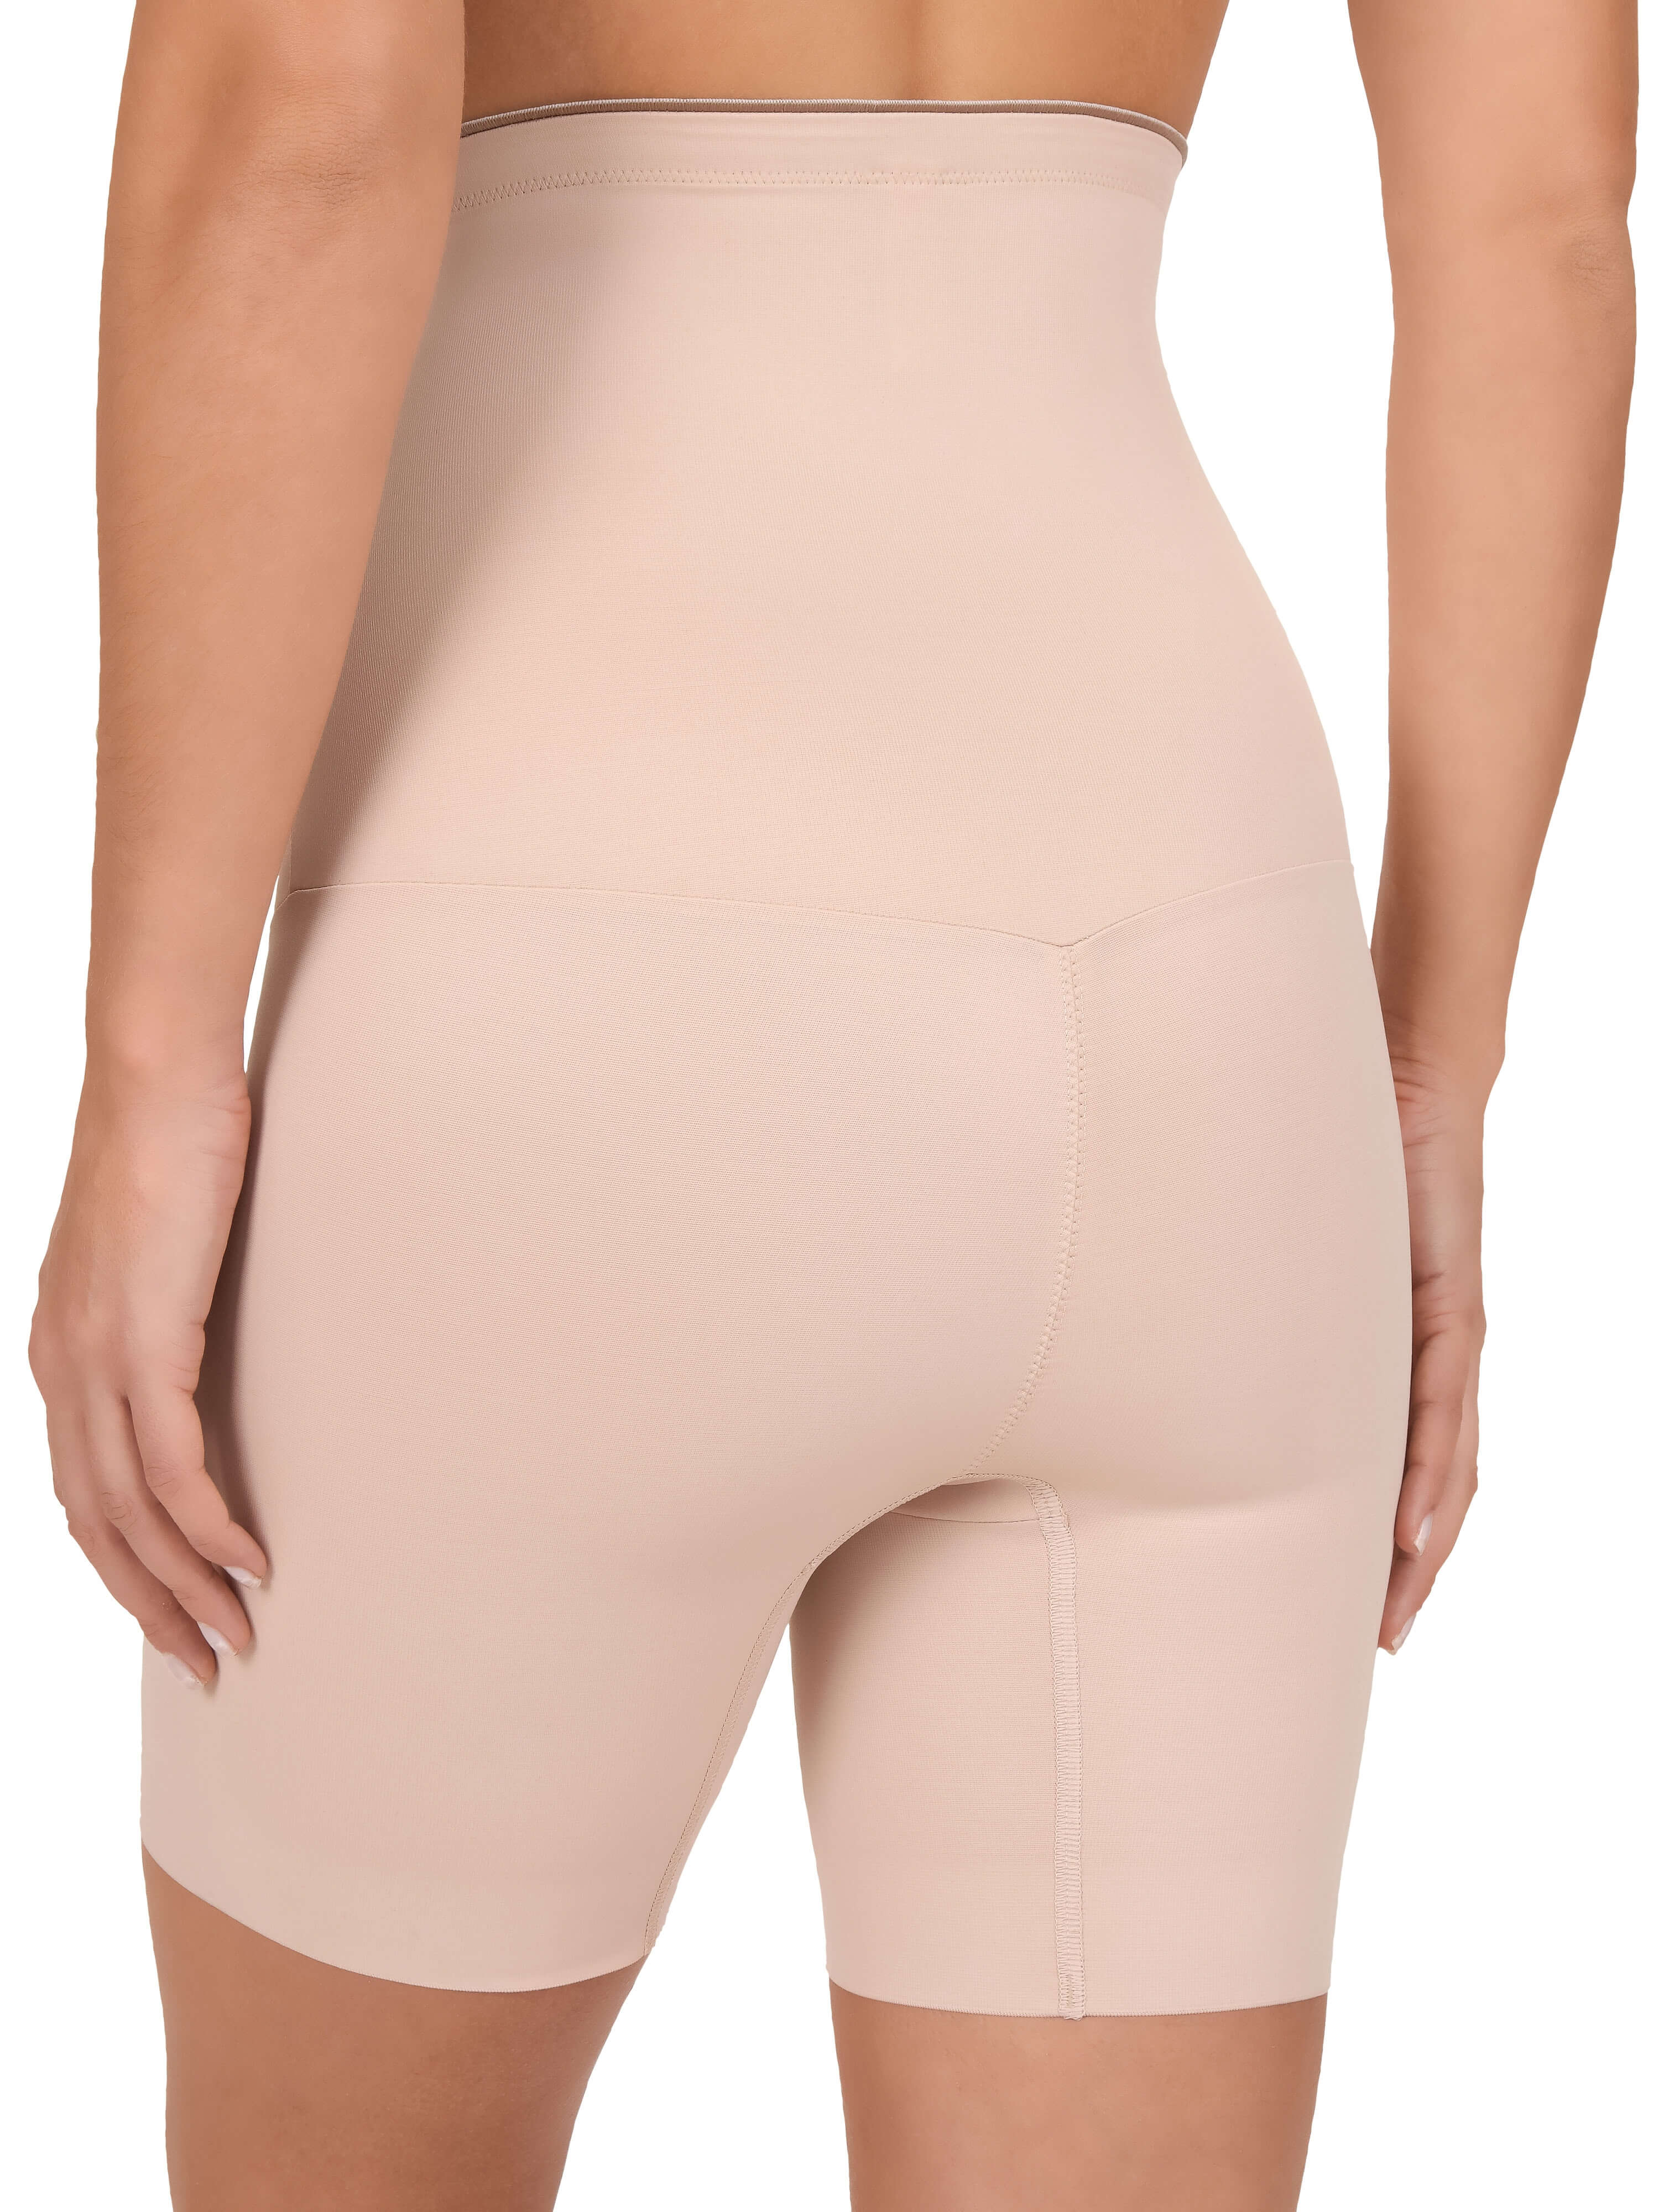 Miraclesuit Sheer Hohe Miederhose mit Bein